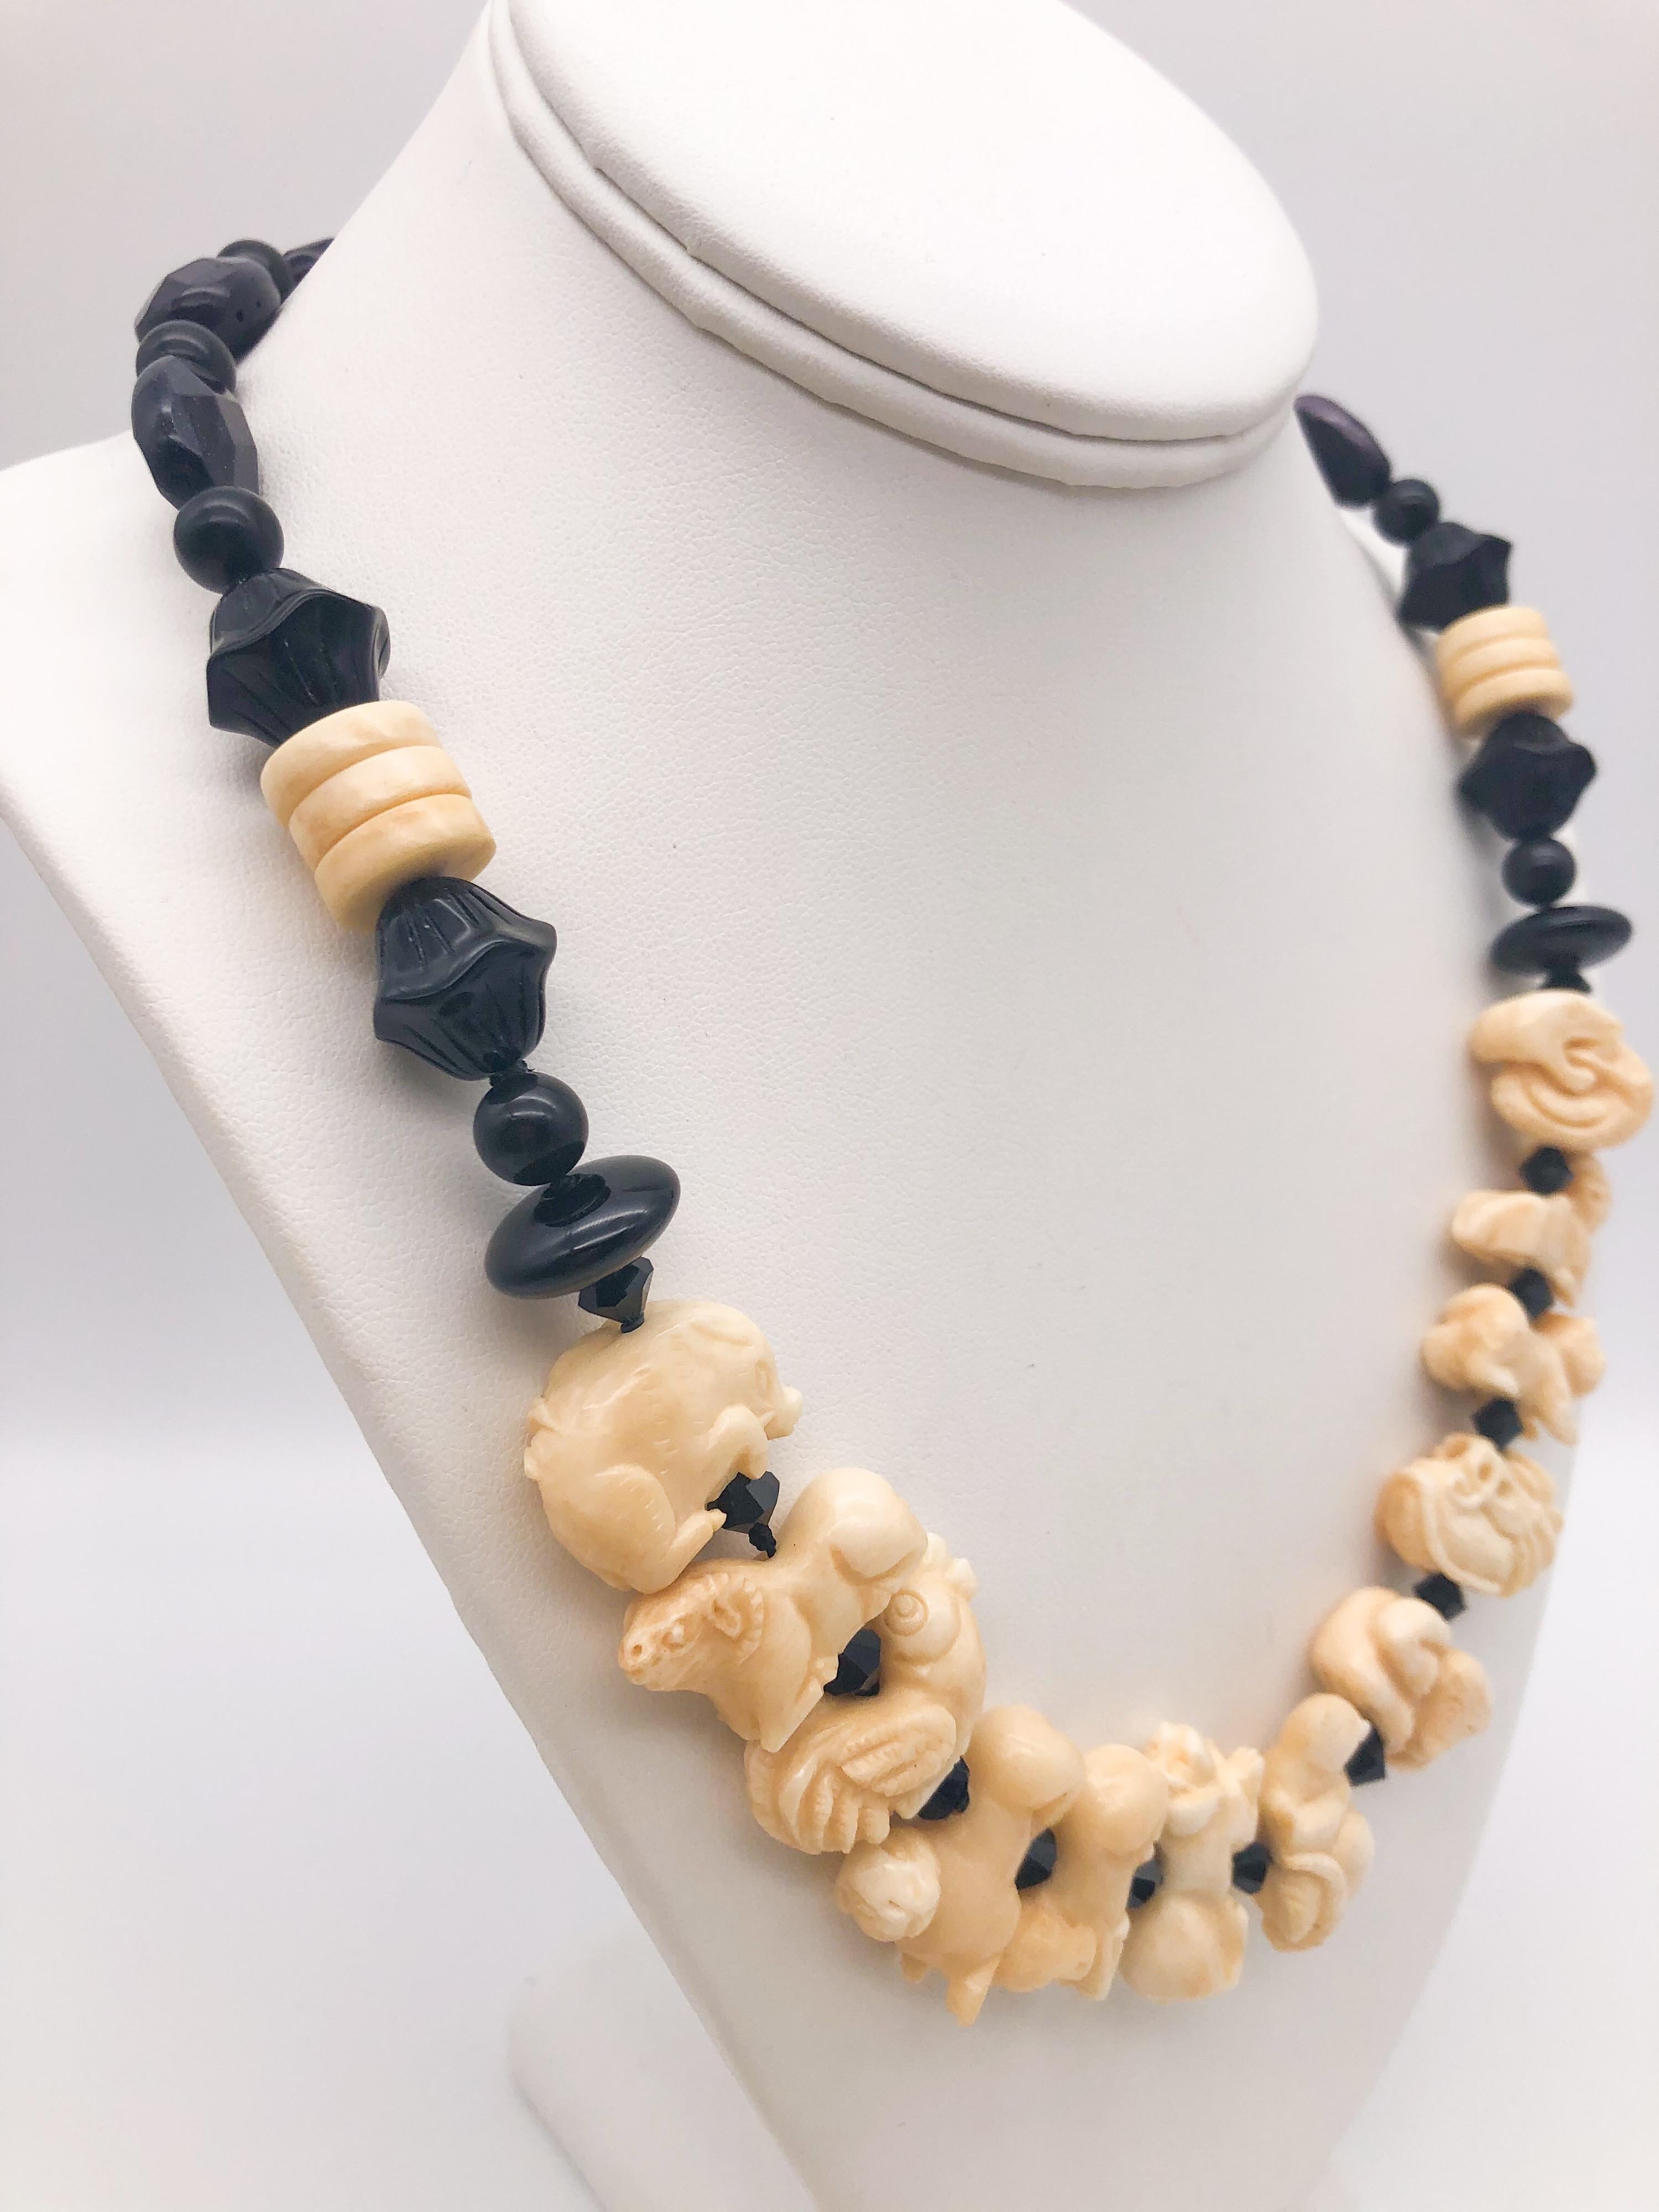 One-of-a-Kind
This necklace shows 12 individual zodiacs carved bone, representing each Chinese year of birth, Tiger, Hare, Dragon, Snake, Horse, Goat, Monkey, Cock, Dog, Boar, Rat, Ox. The animals are spaced with small onyx beads. Finished with Jet